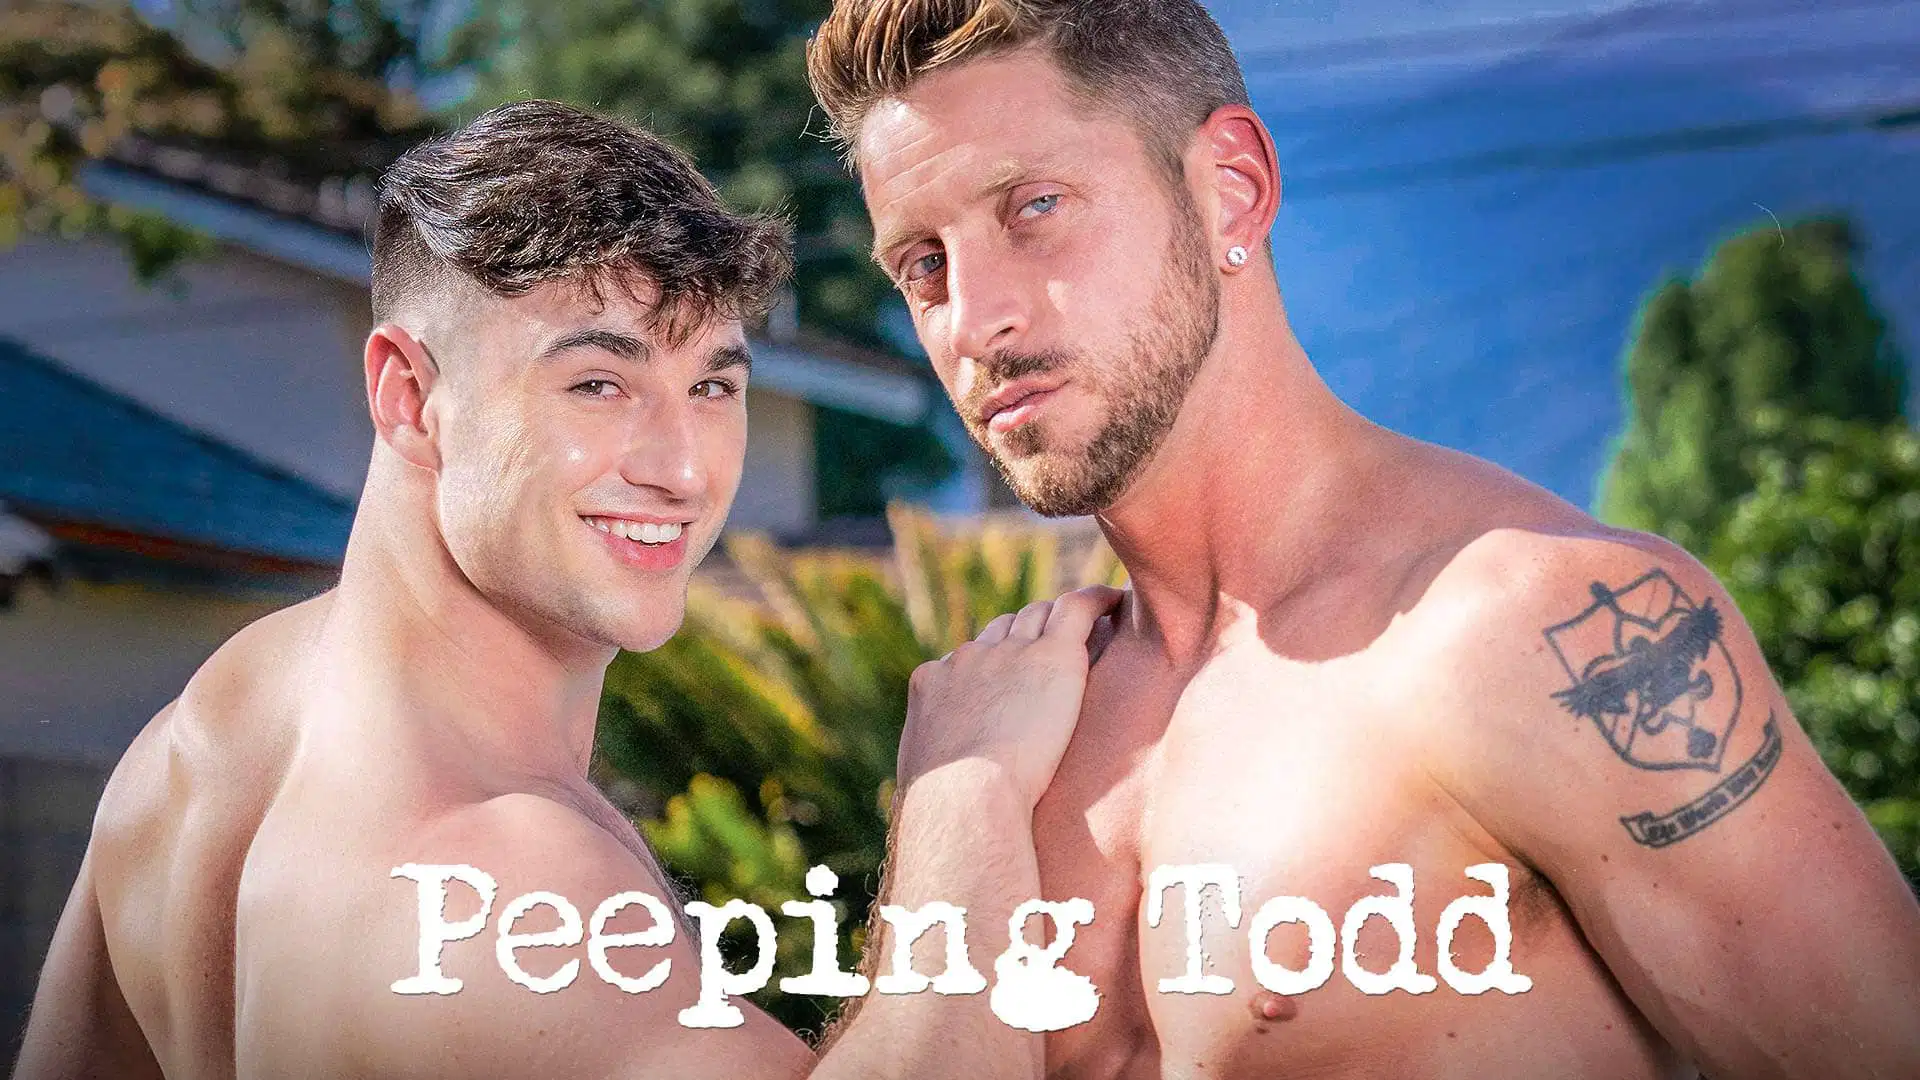 Peeping Todd – Johnny Ford and Michael Boston